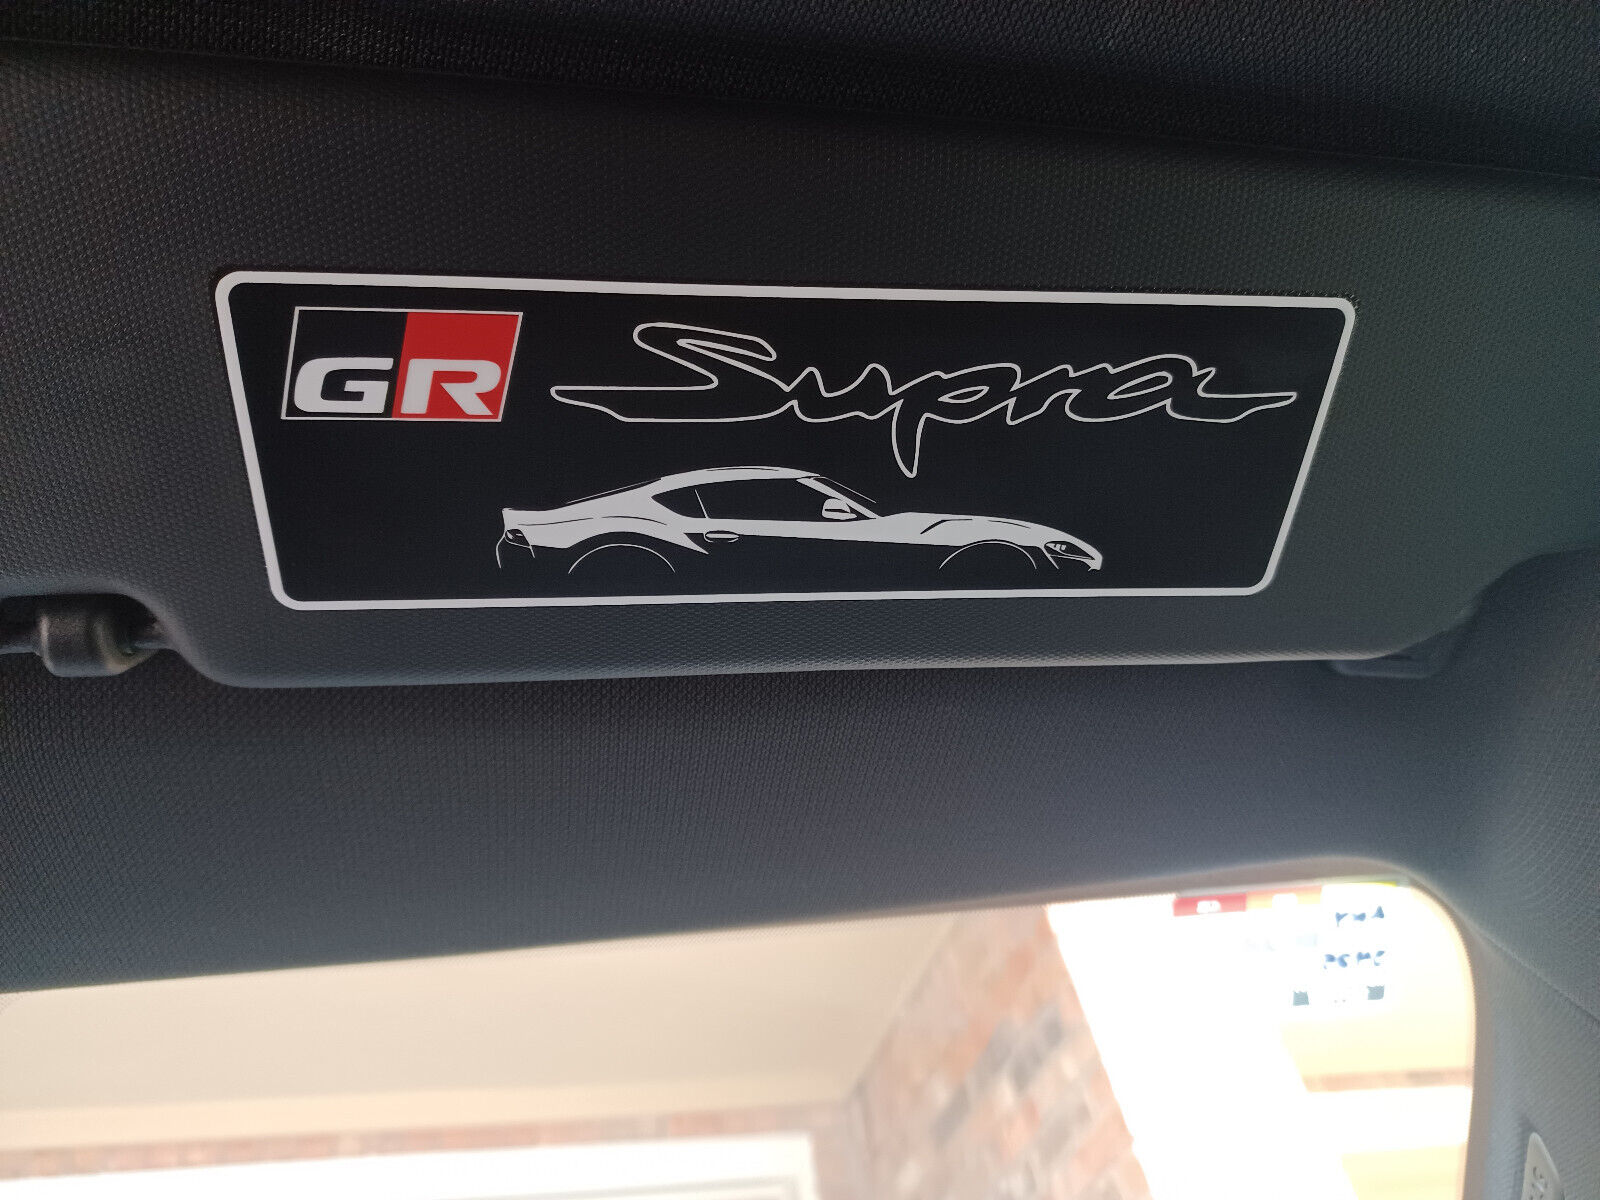 2x Toyota GR Supra Decals for Sun Visor Warning Cover Up